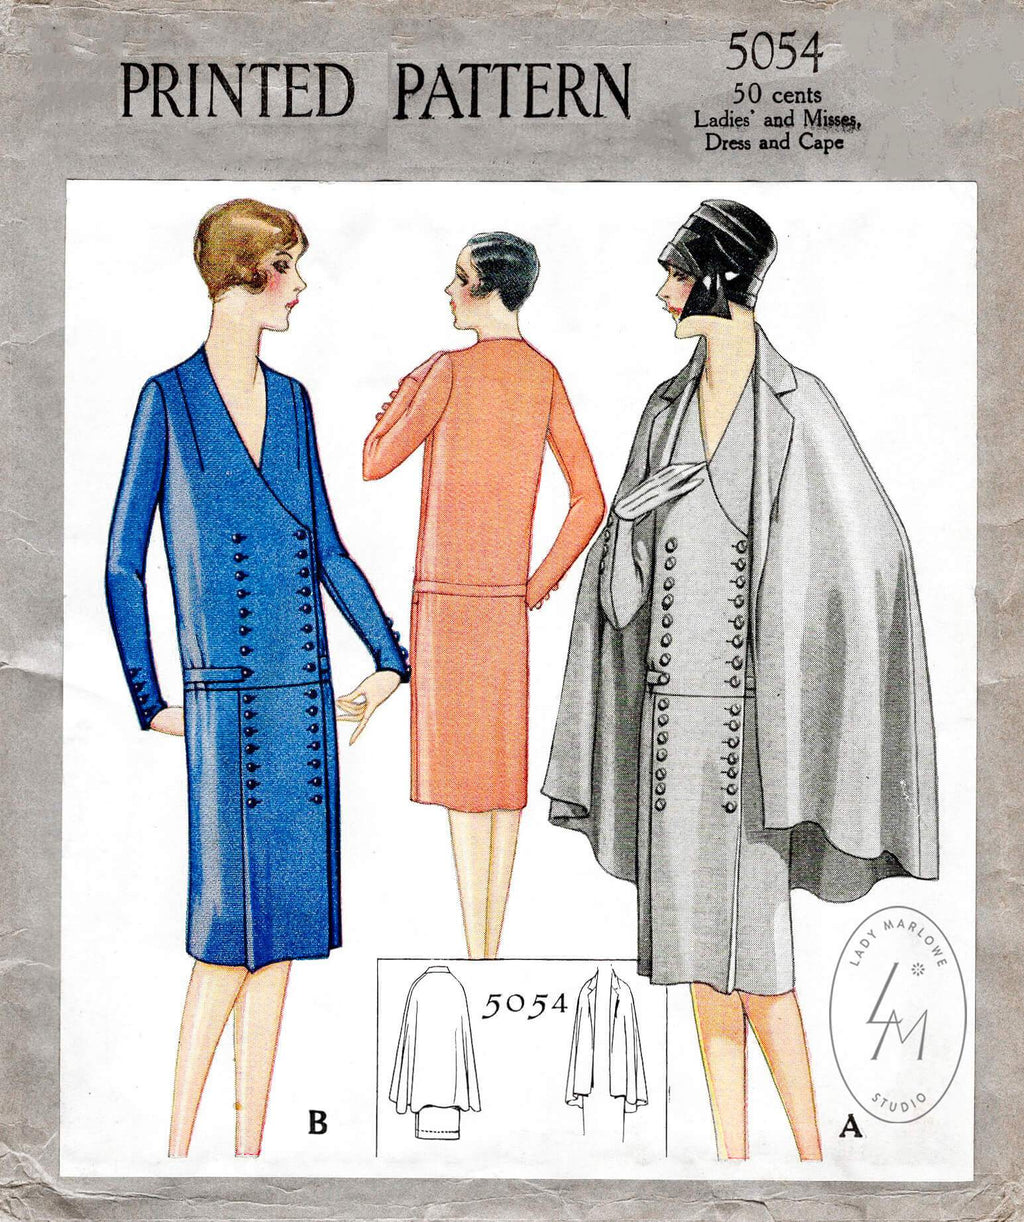 1920s 1927 McCall 5054 drop waist dress & cape vintage sewing pattern reproduction